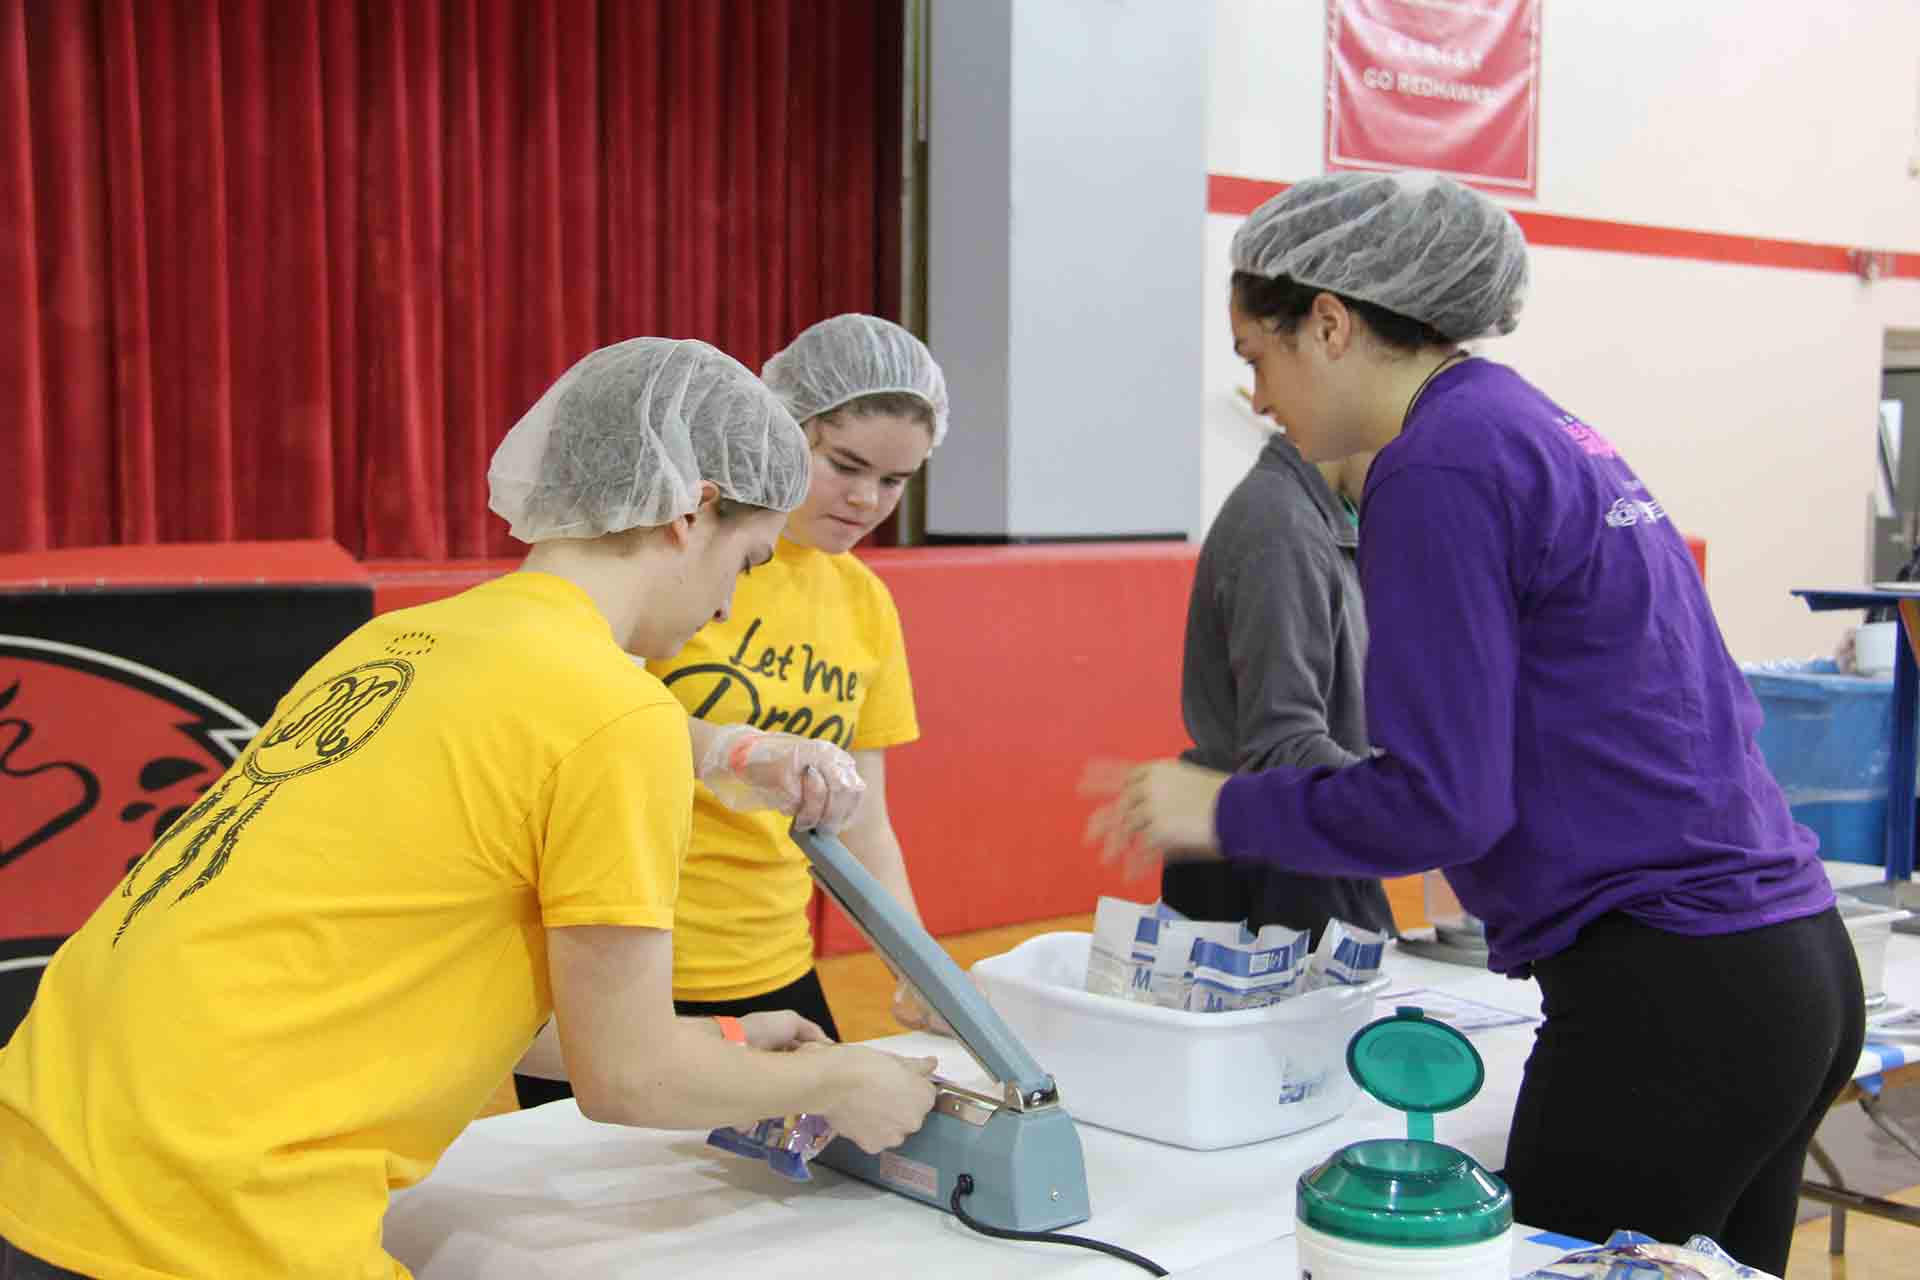 national-day-of-service-1-10